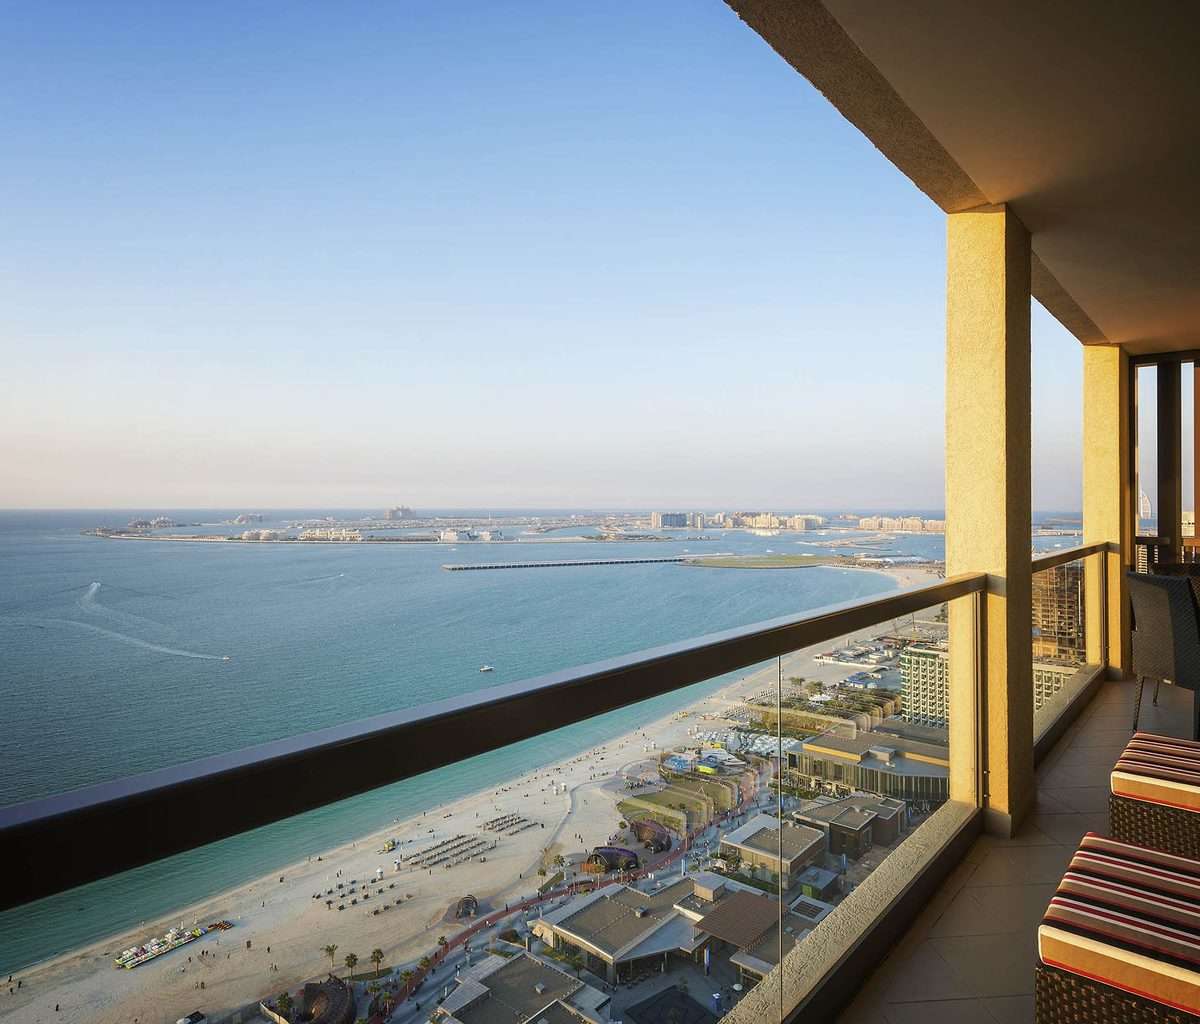 View from one of the balconies at Sofitel Jumeirah Beach, overlooking the Arabian Gulf